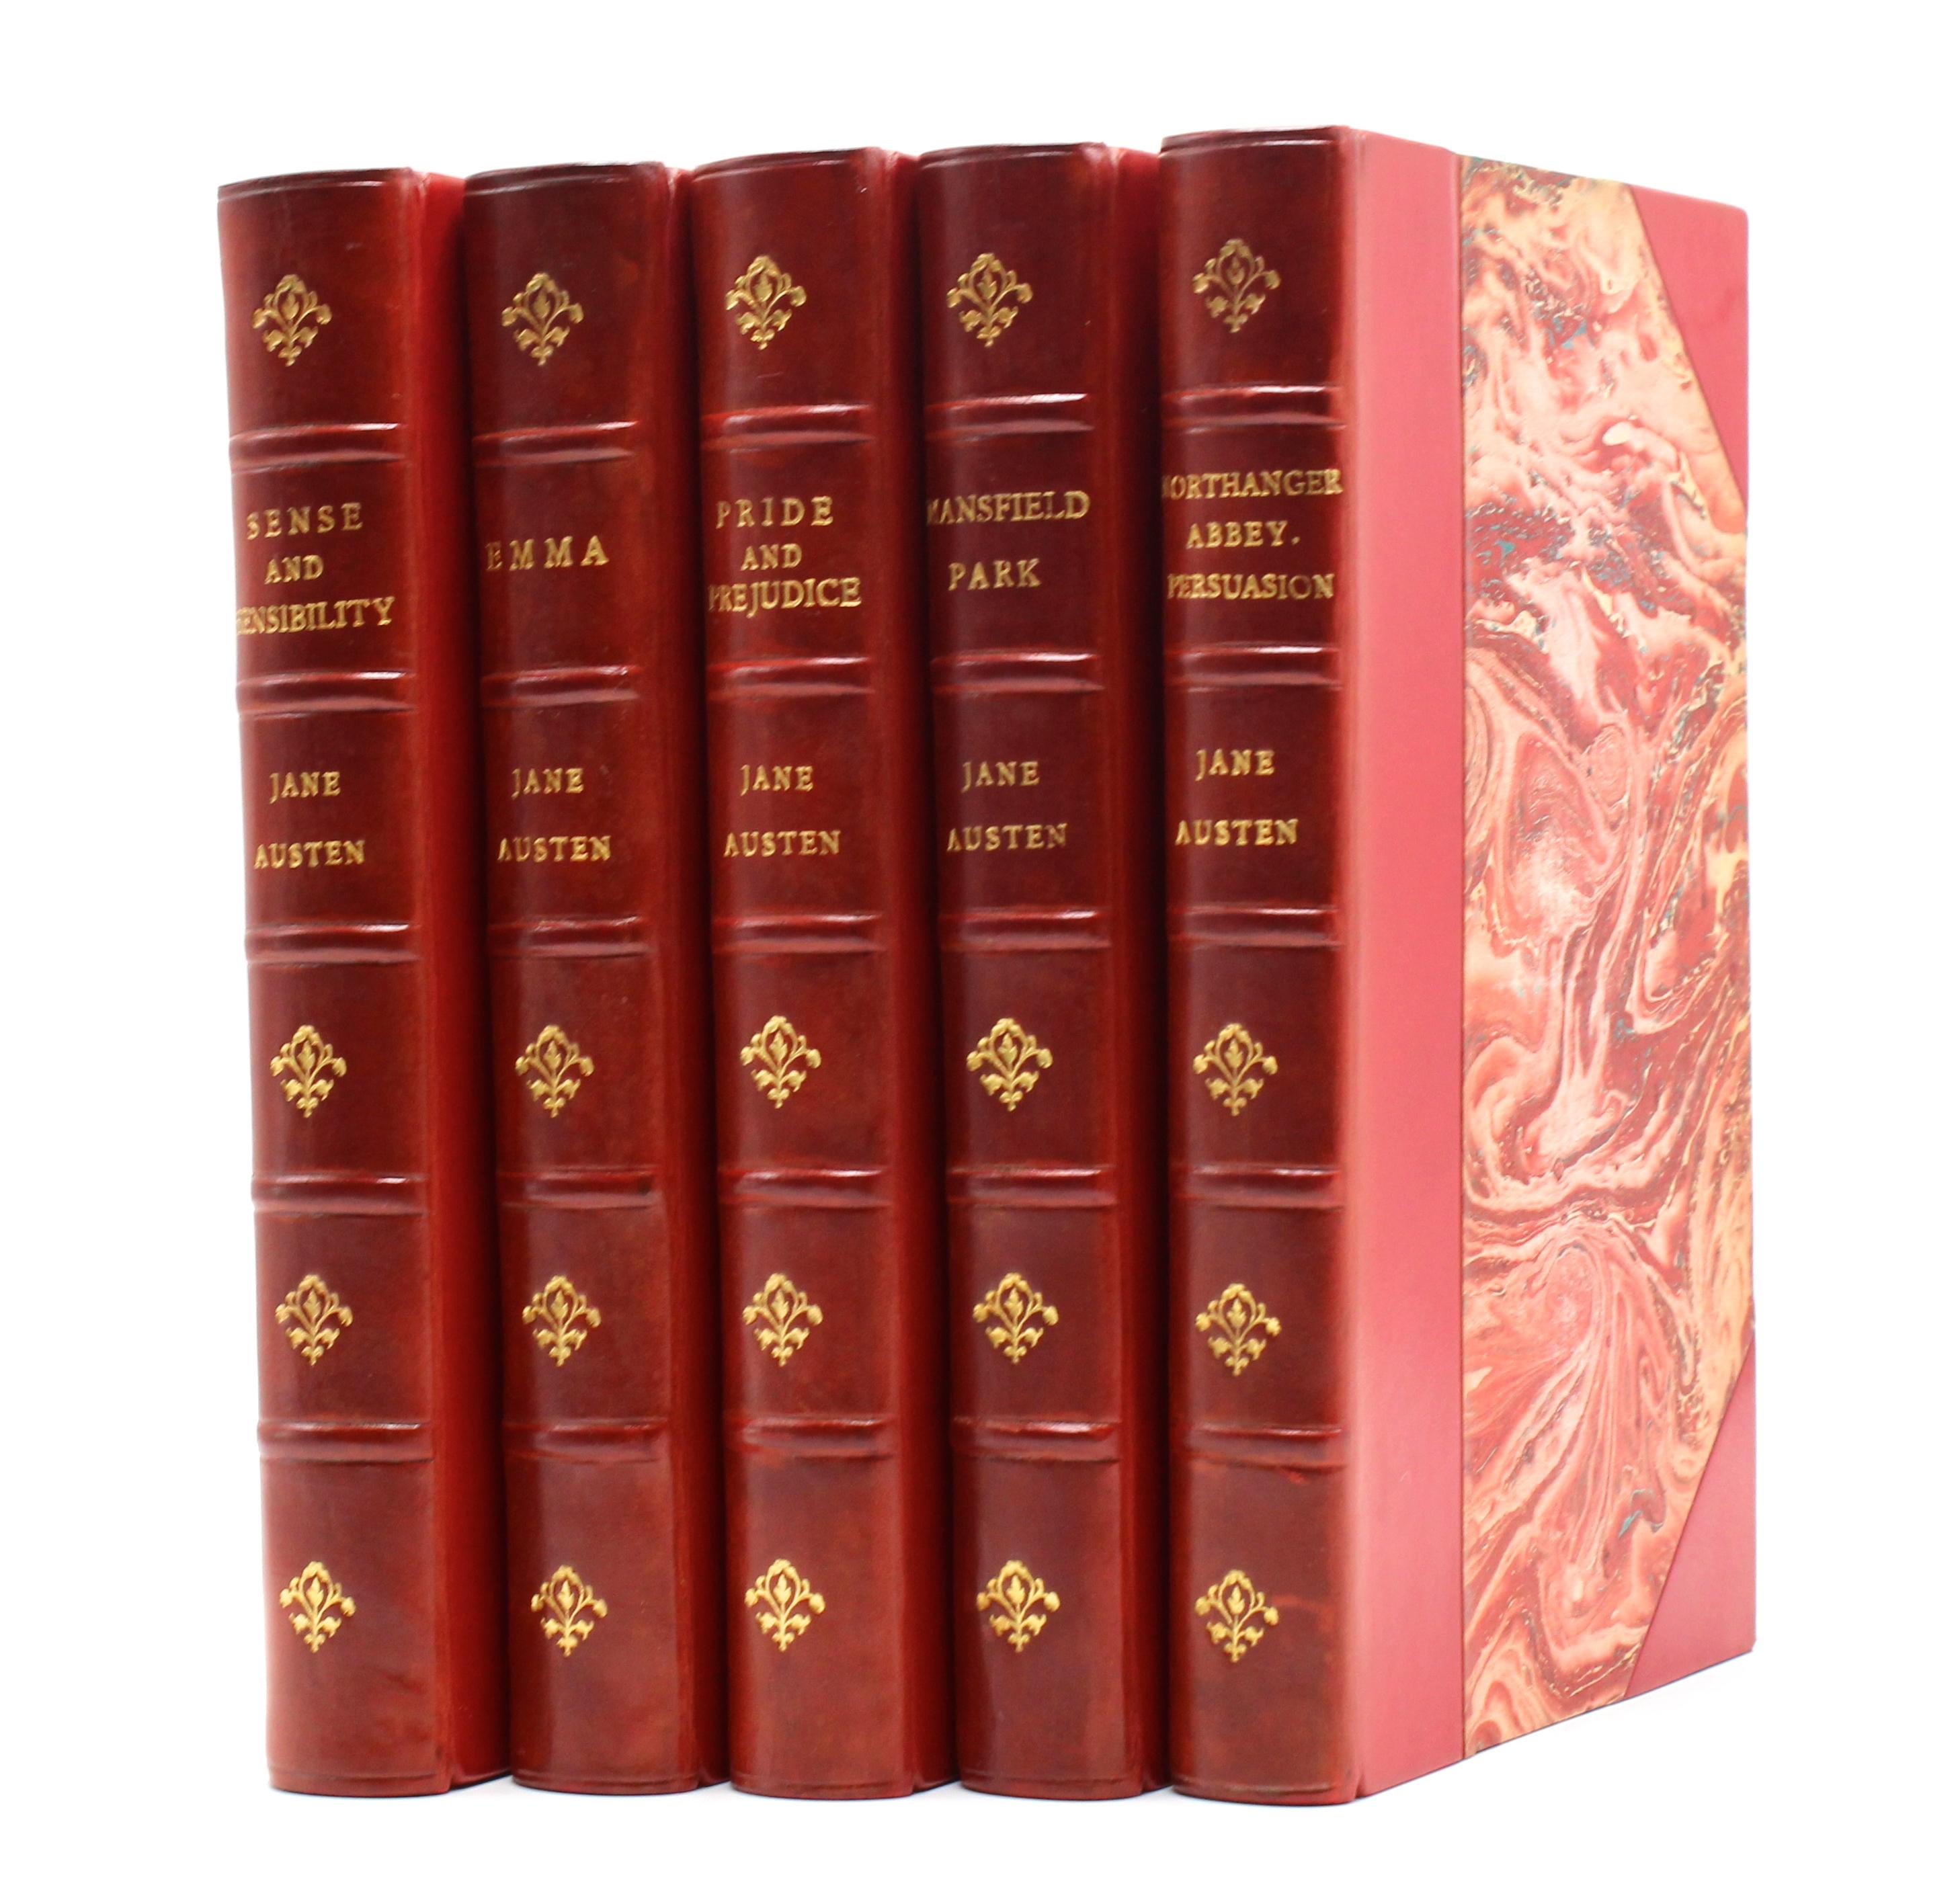 Presented is a beautiful five volume set of “Jane Austen’s Works,” published by Robert Riviere & Son, Ltd. in London, in stunning period bindings. The books were published in the 1920s, reprinted from the 1813 second edition printing of Austen’s